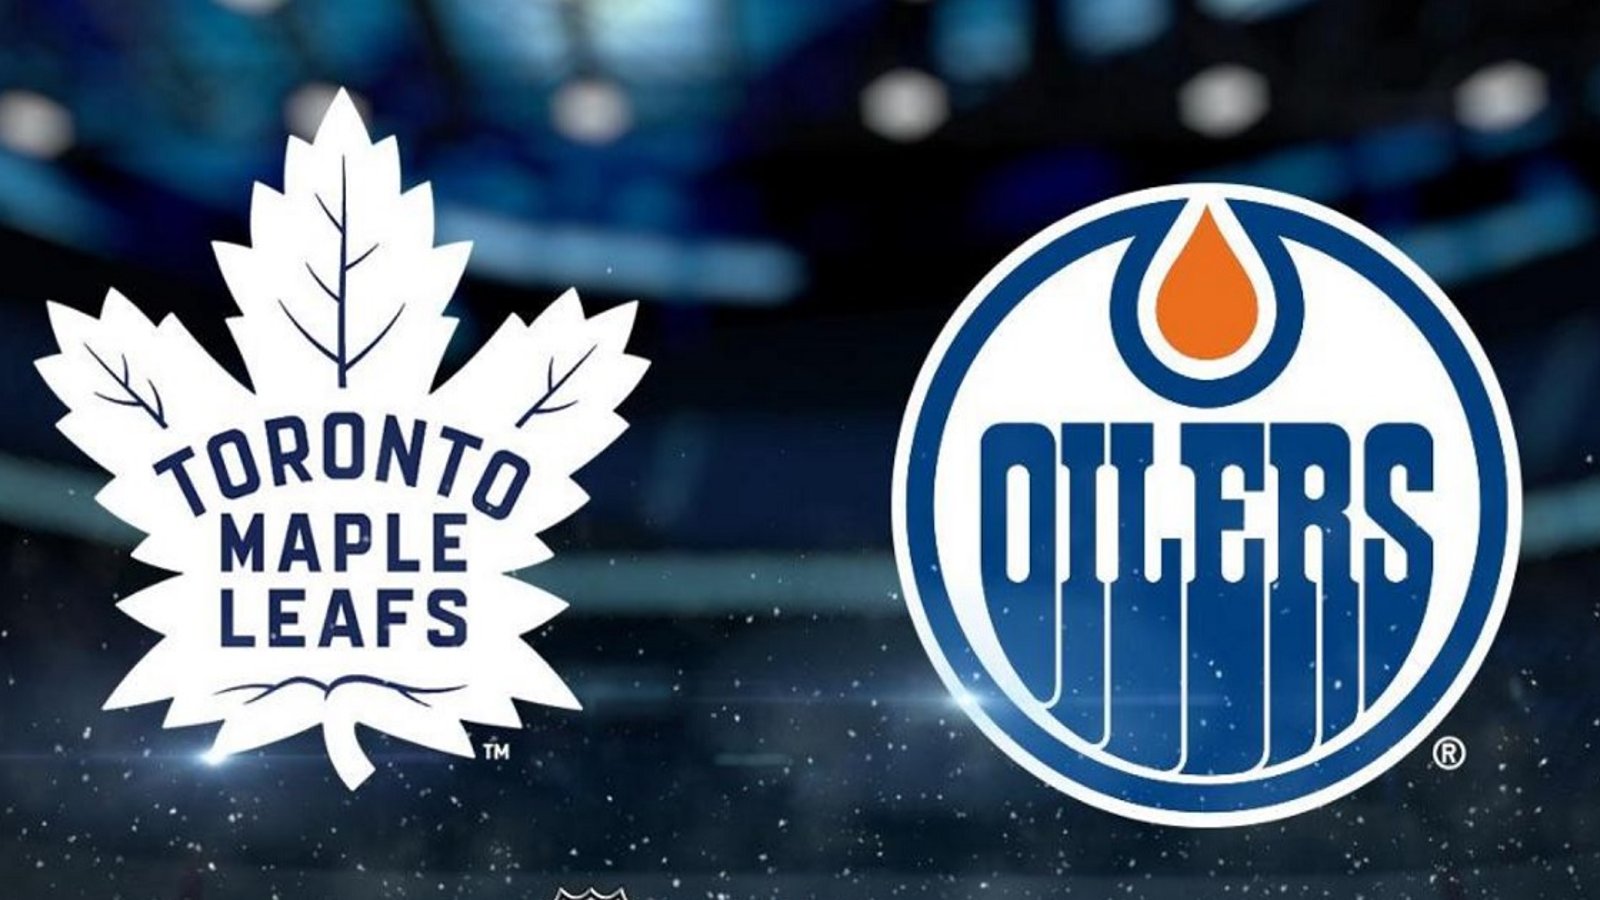 Oilers &amp; Leafs forced to cancel today's events under direction from NHL.